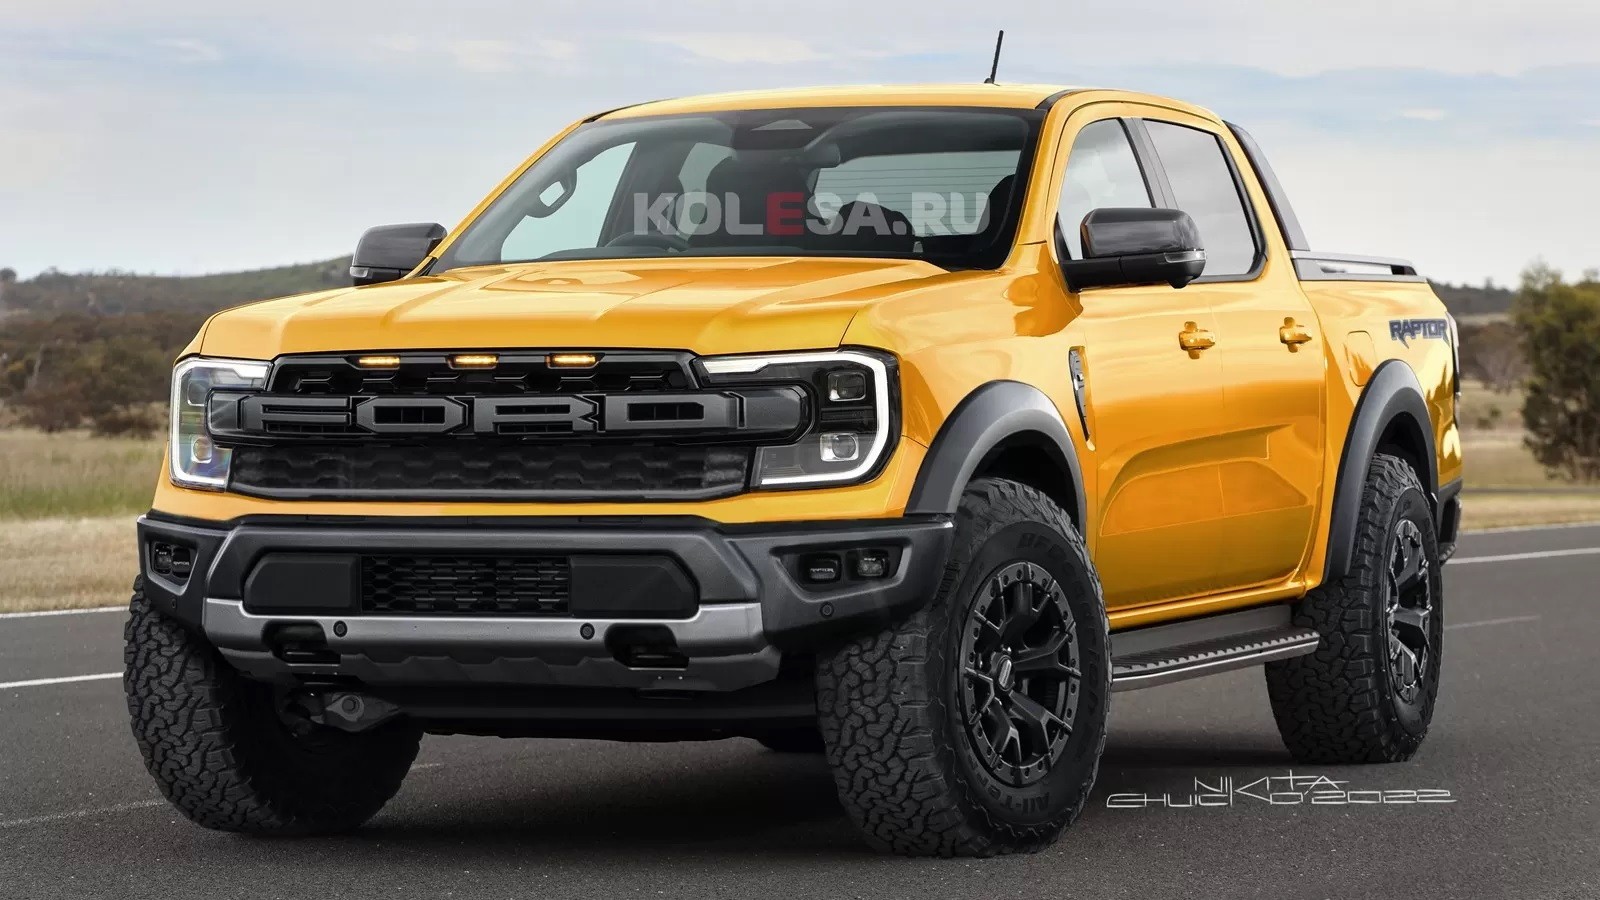 2023 Ford Ranger Raptor Brings Bad Boy Looks To The Super Truck Party